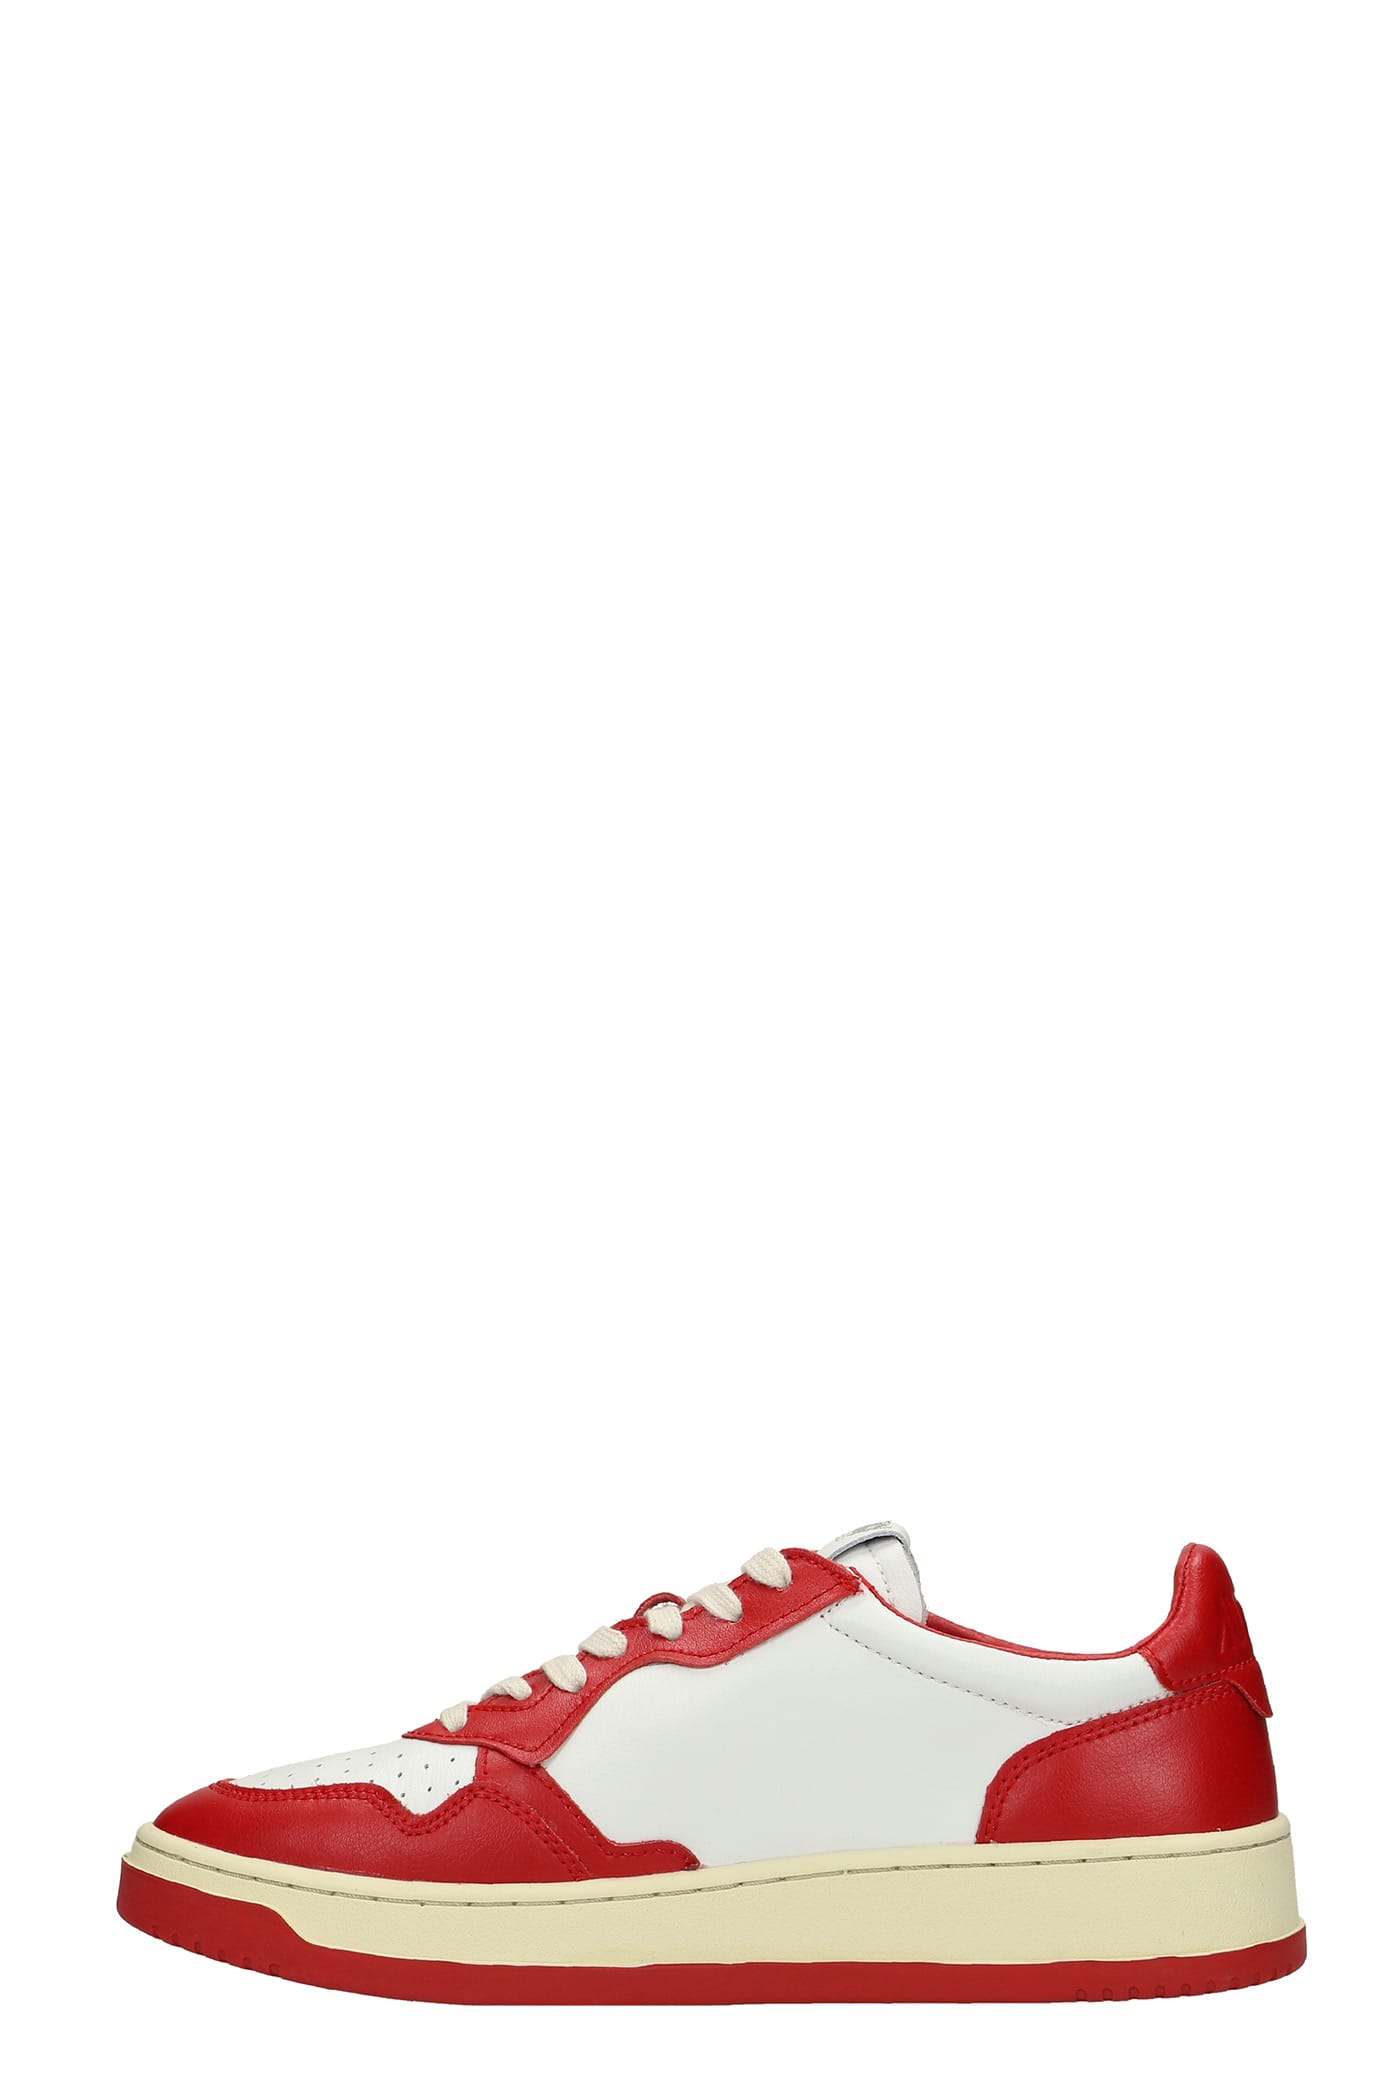 Shop Autry 01 Sneakers In Red Leather In White/red